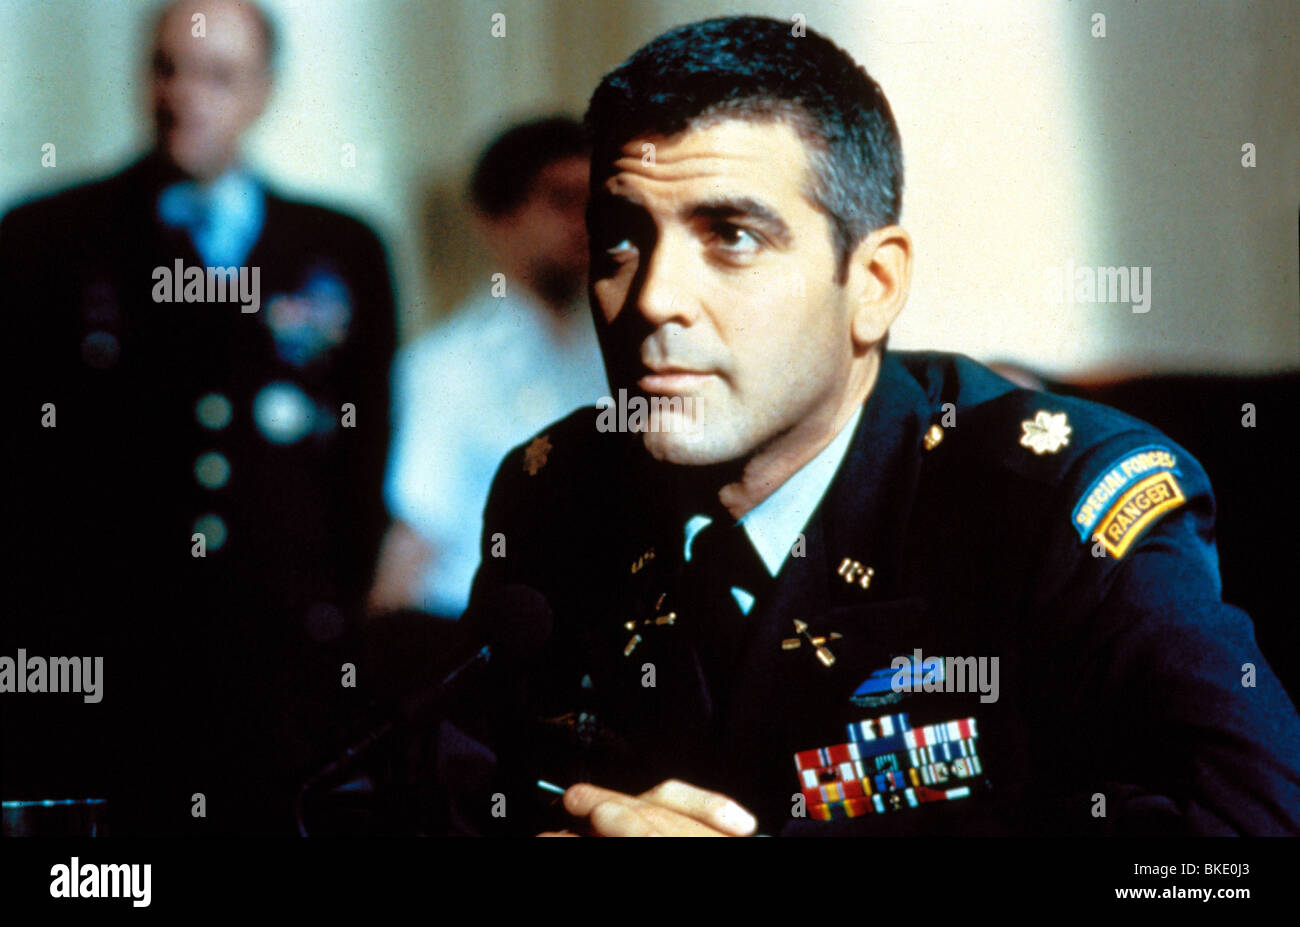 THE PEACEMAKER (1997) GEORGE CLOONEY PEAC 001 Stock Photo